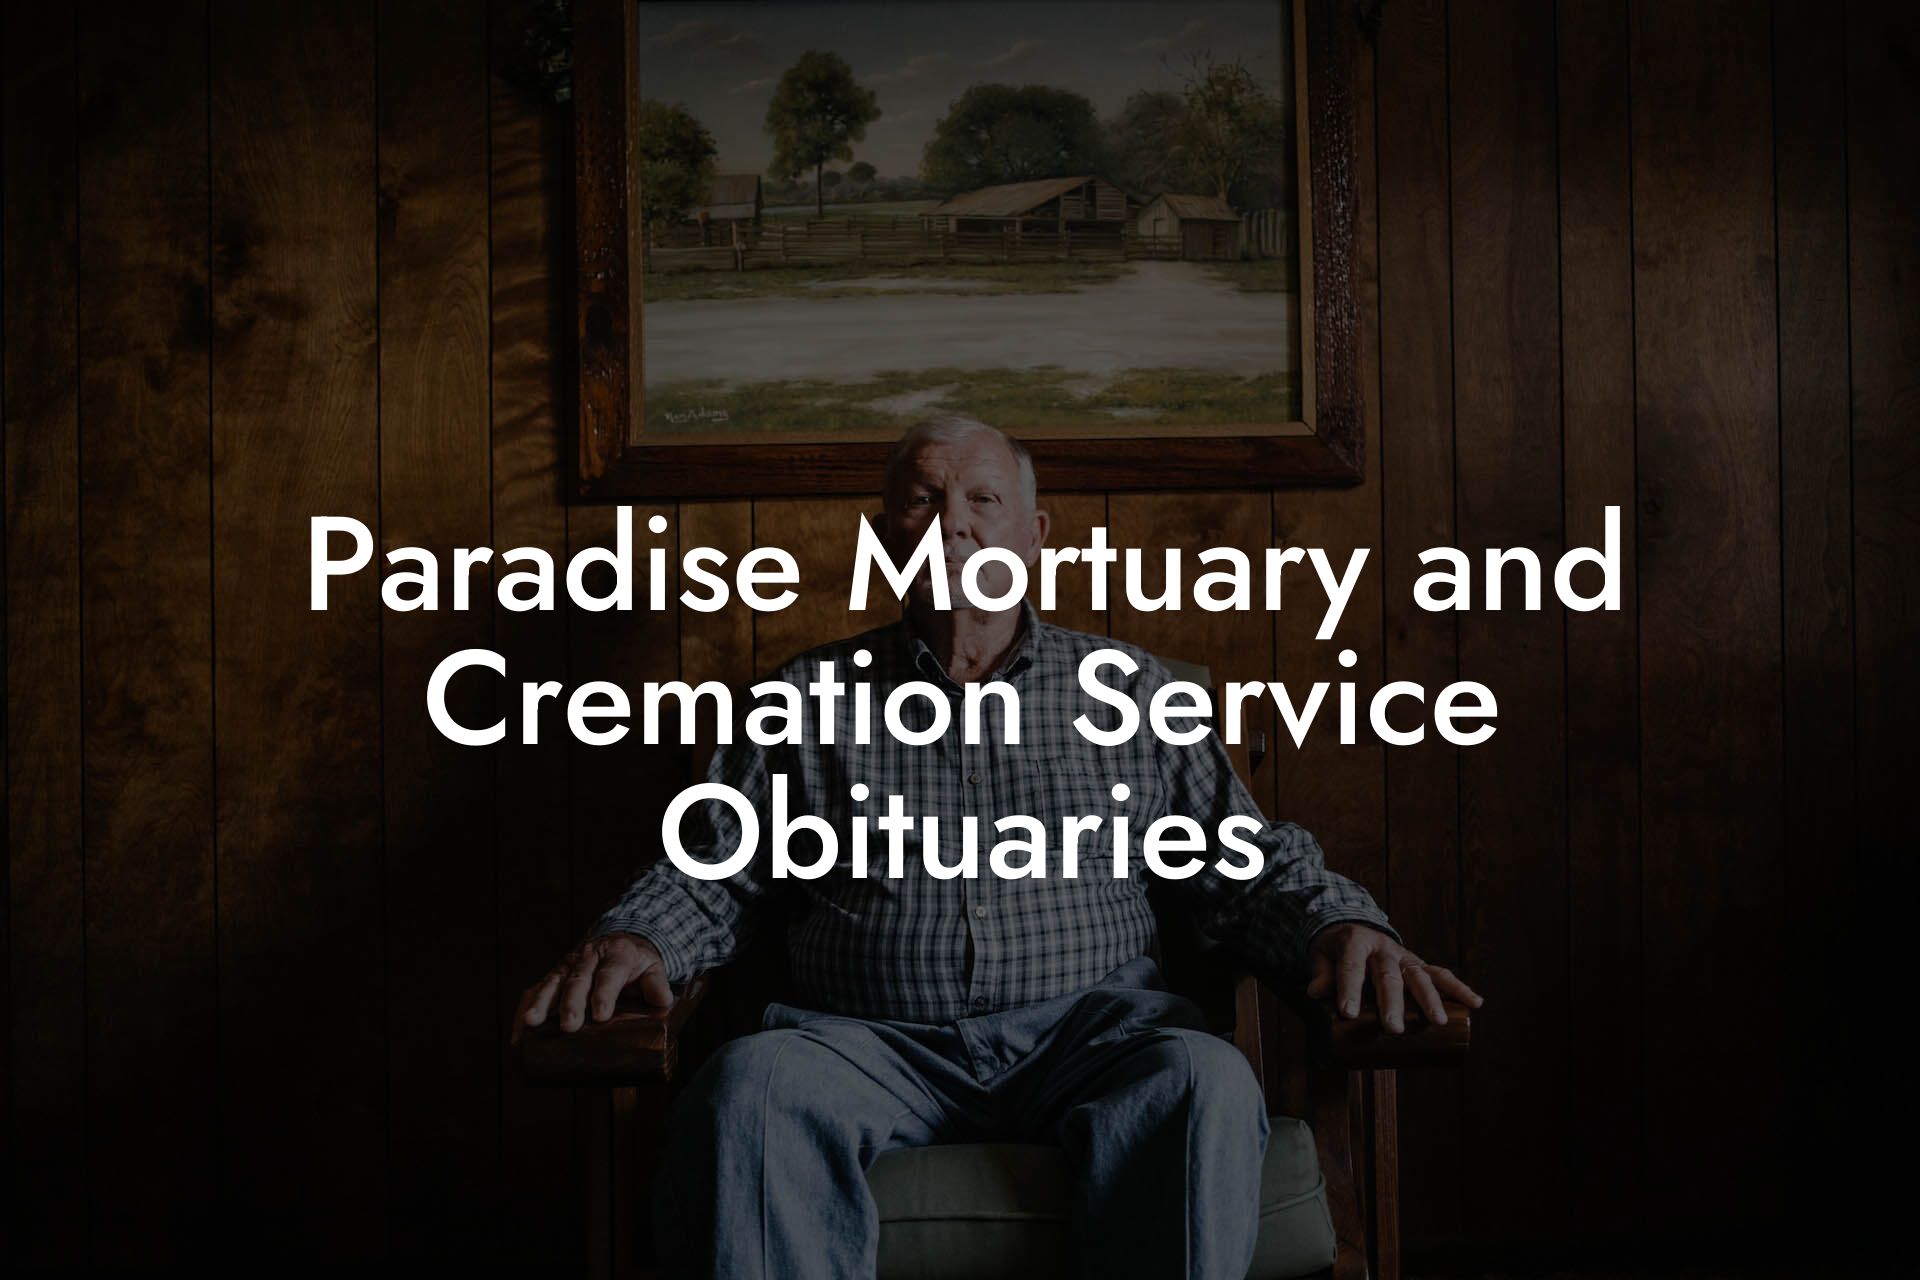 Paradise Mortuary and Cremation Service Obituaries